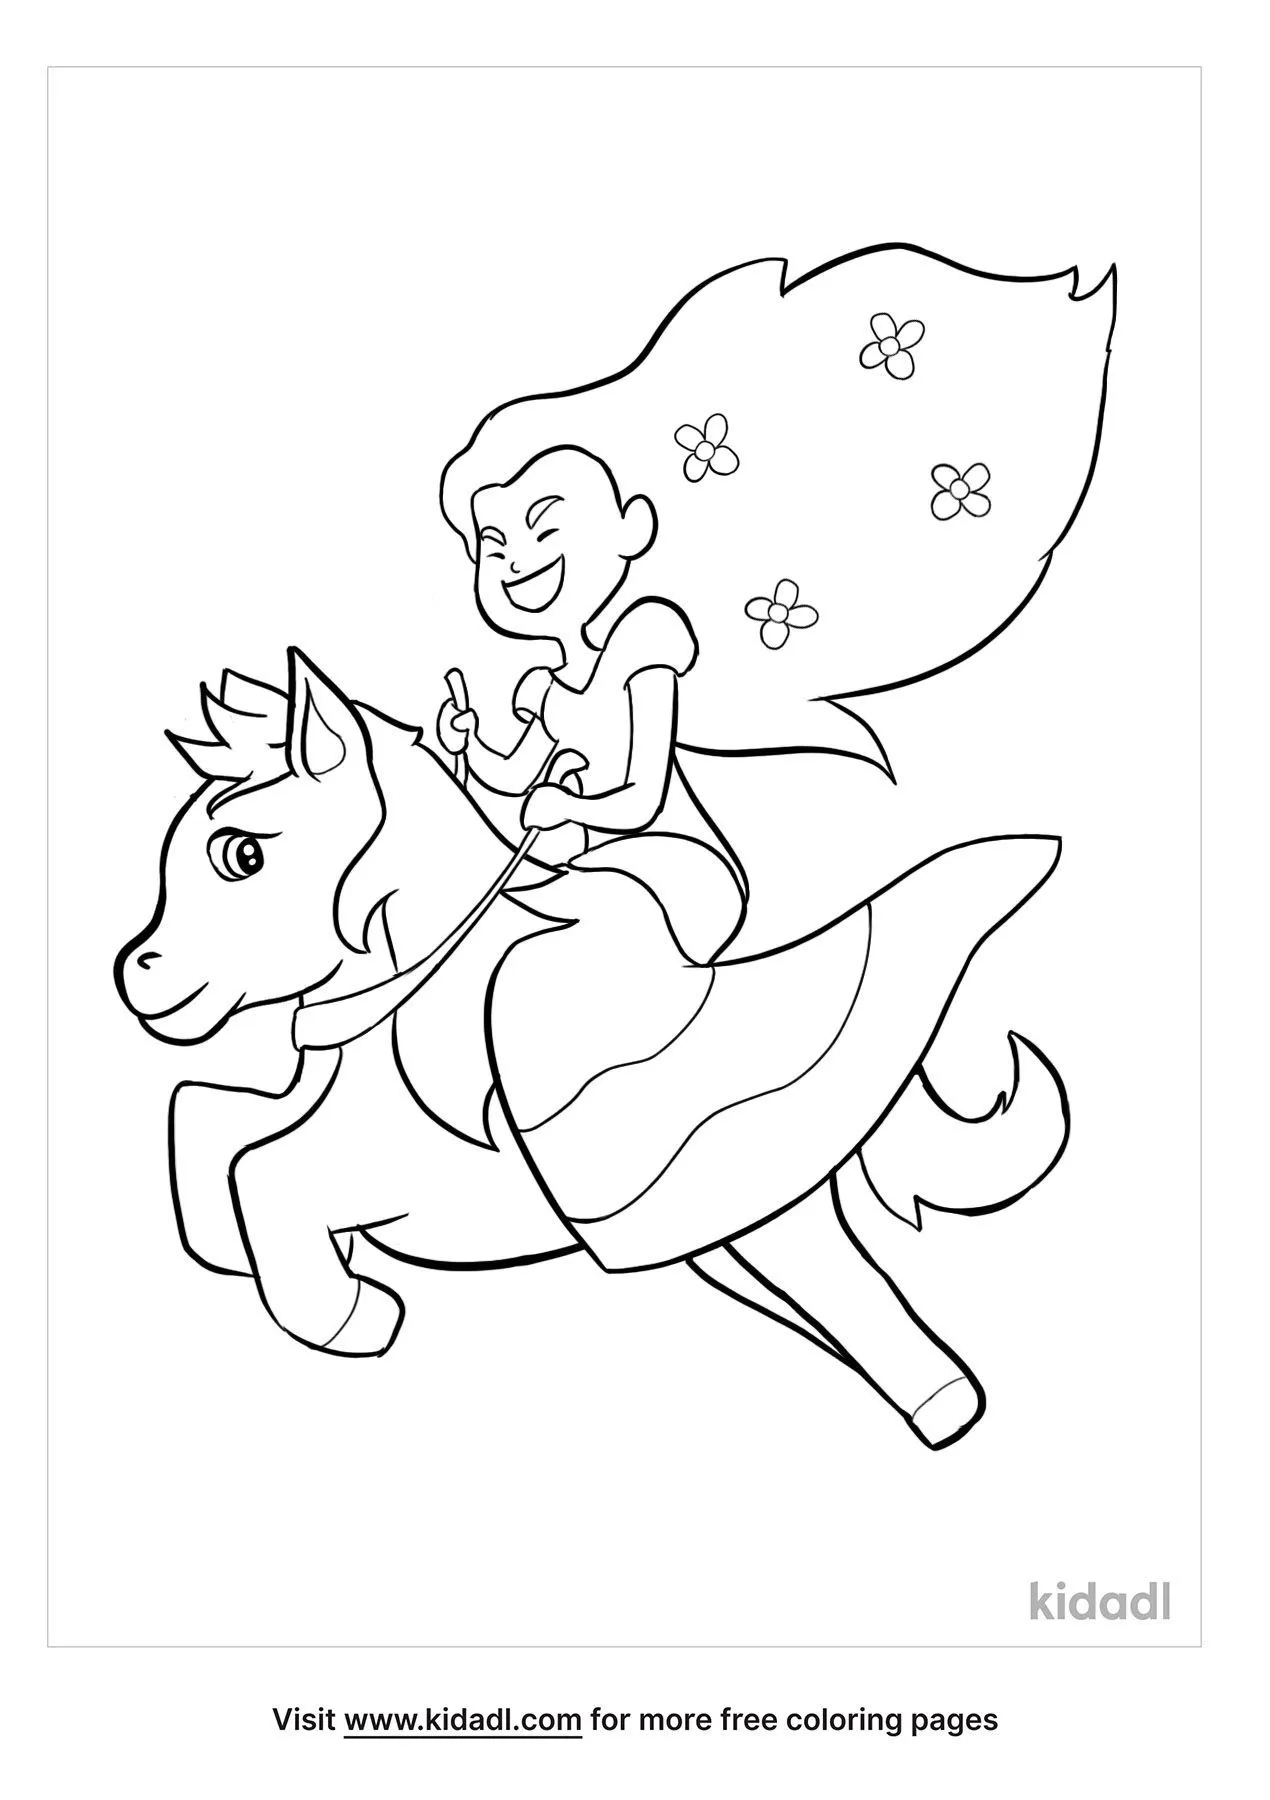 Princess Horse Coloring Pages   Free Princess Coloring Pages   Kidadl